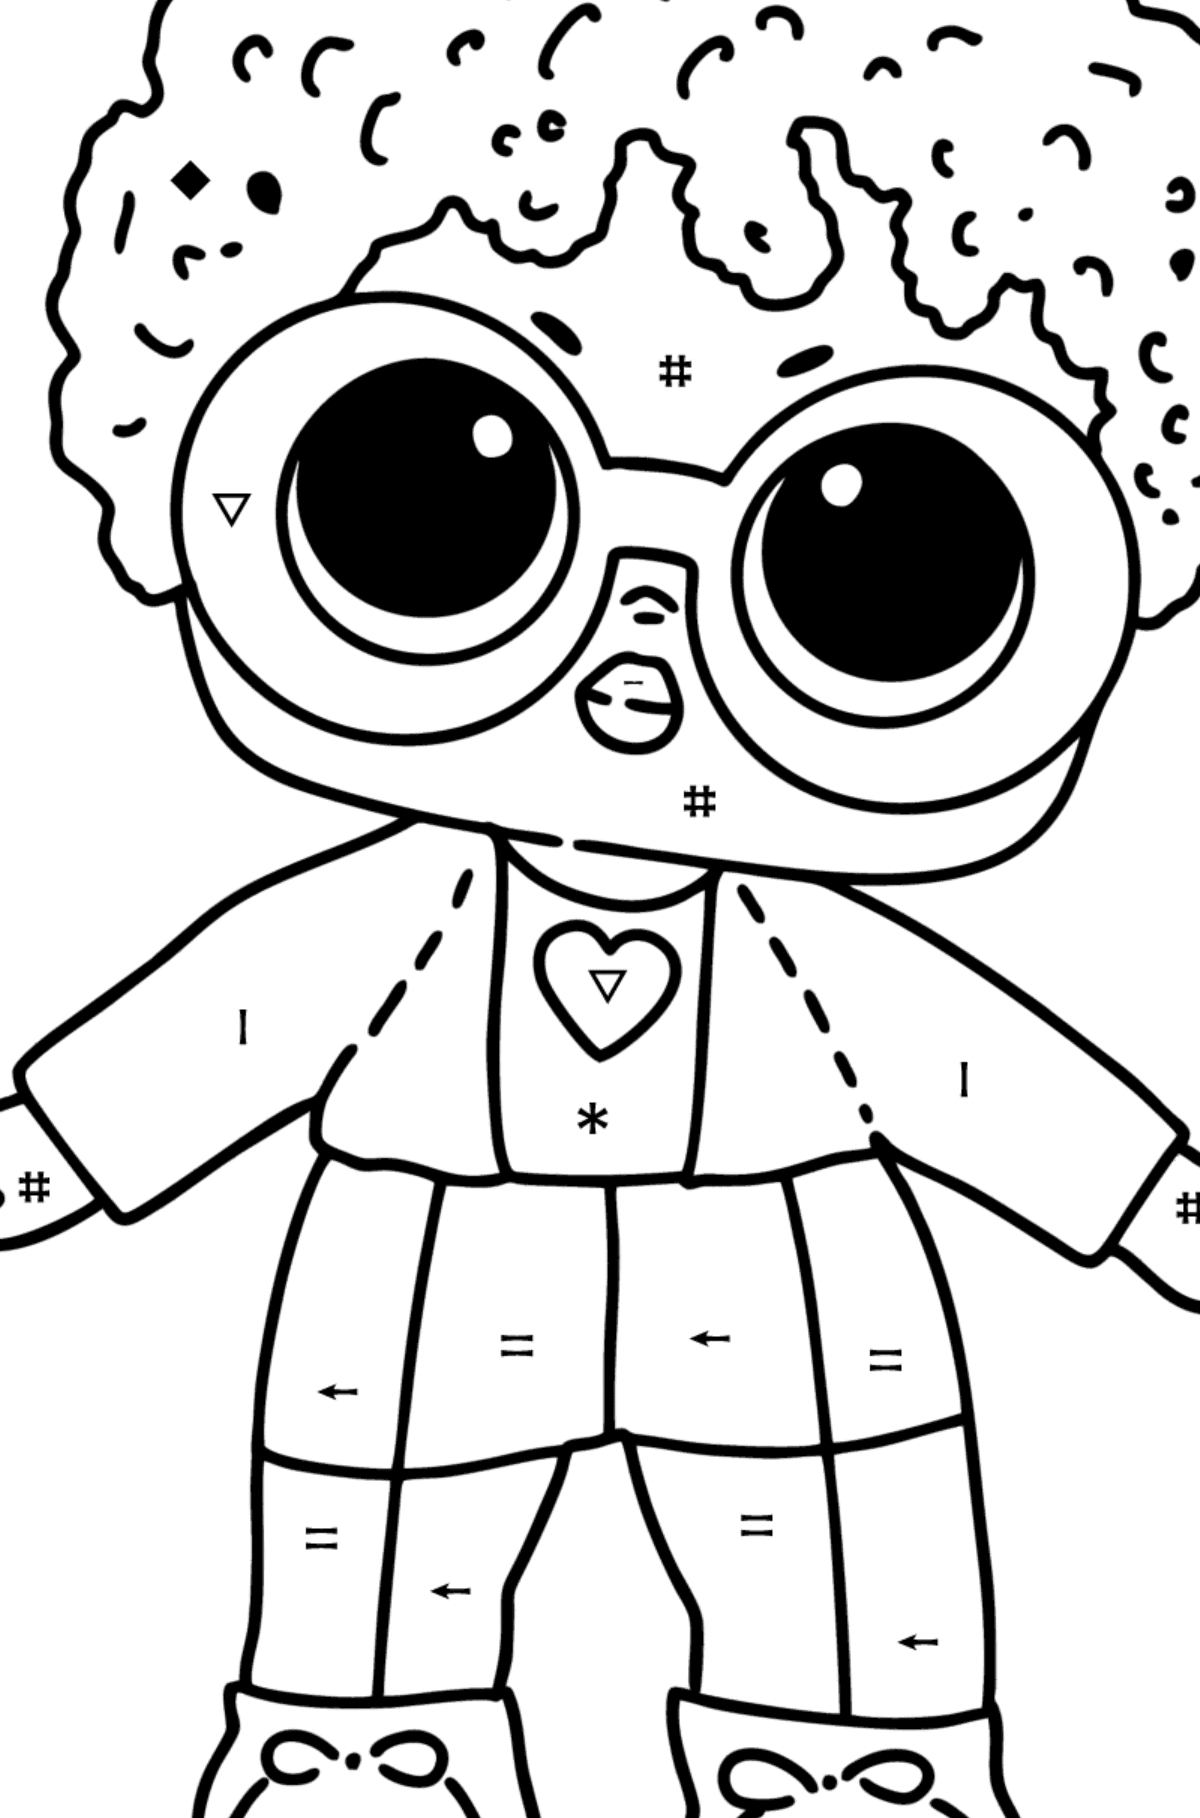 LOL Surprise Steezy Doll Boy coloring page - Coloring by Symbols for Kids